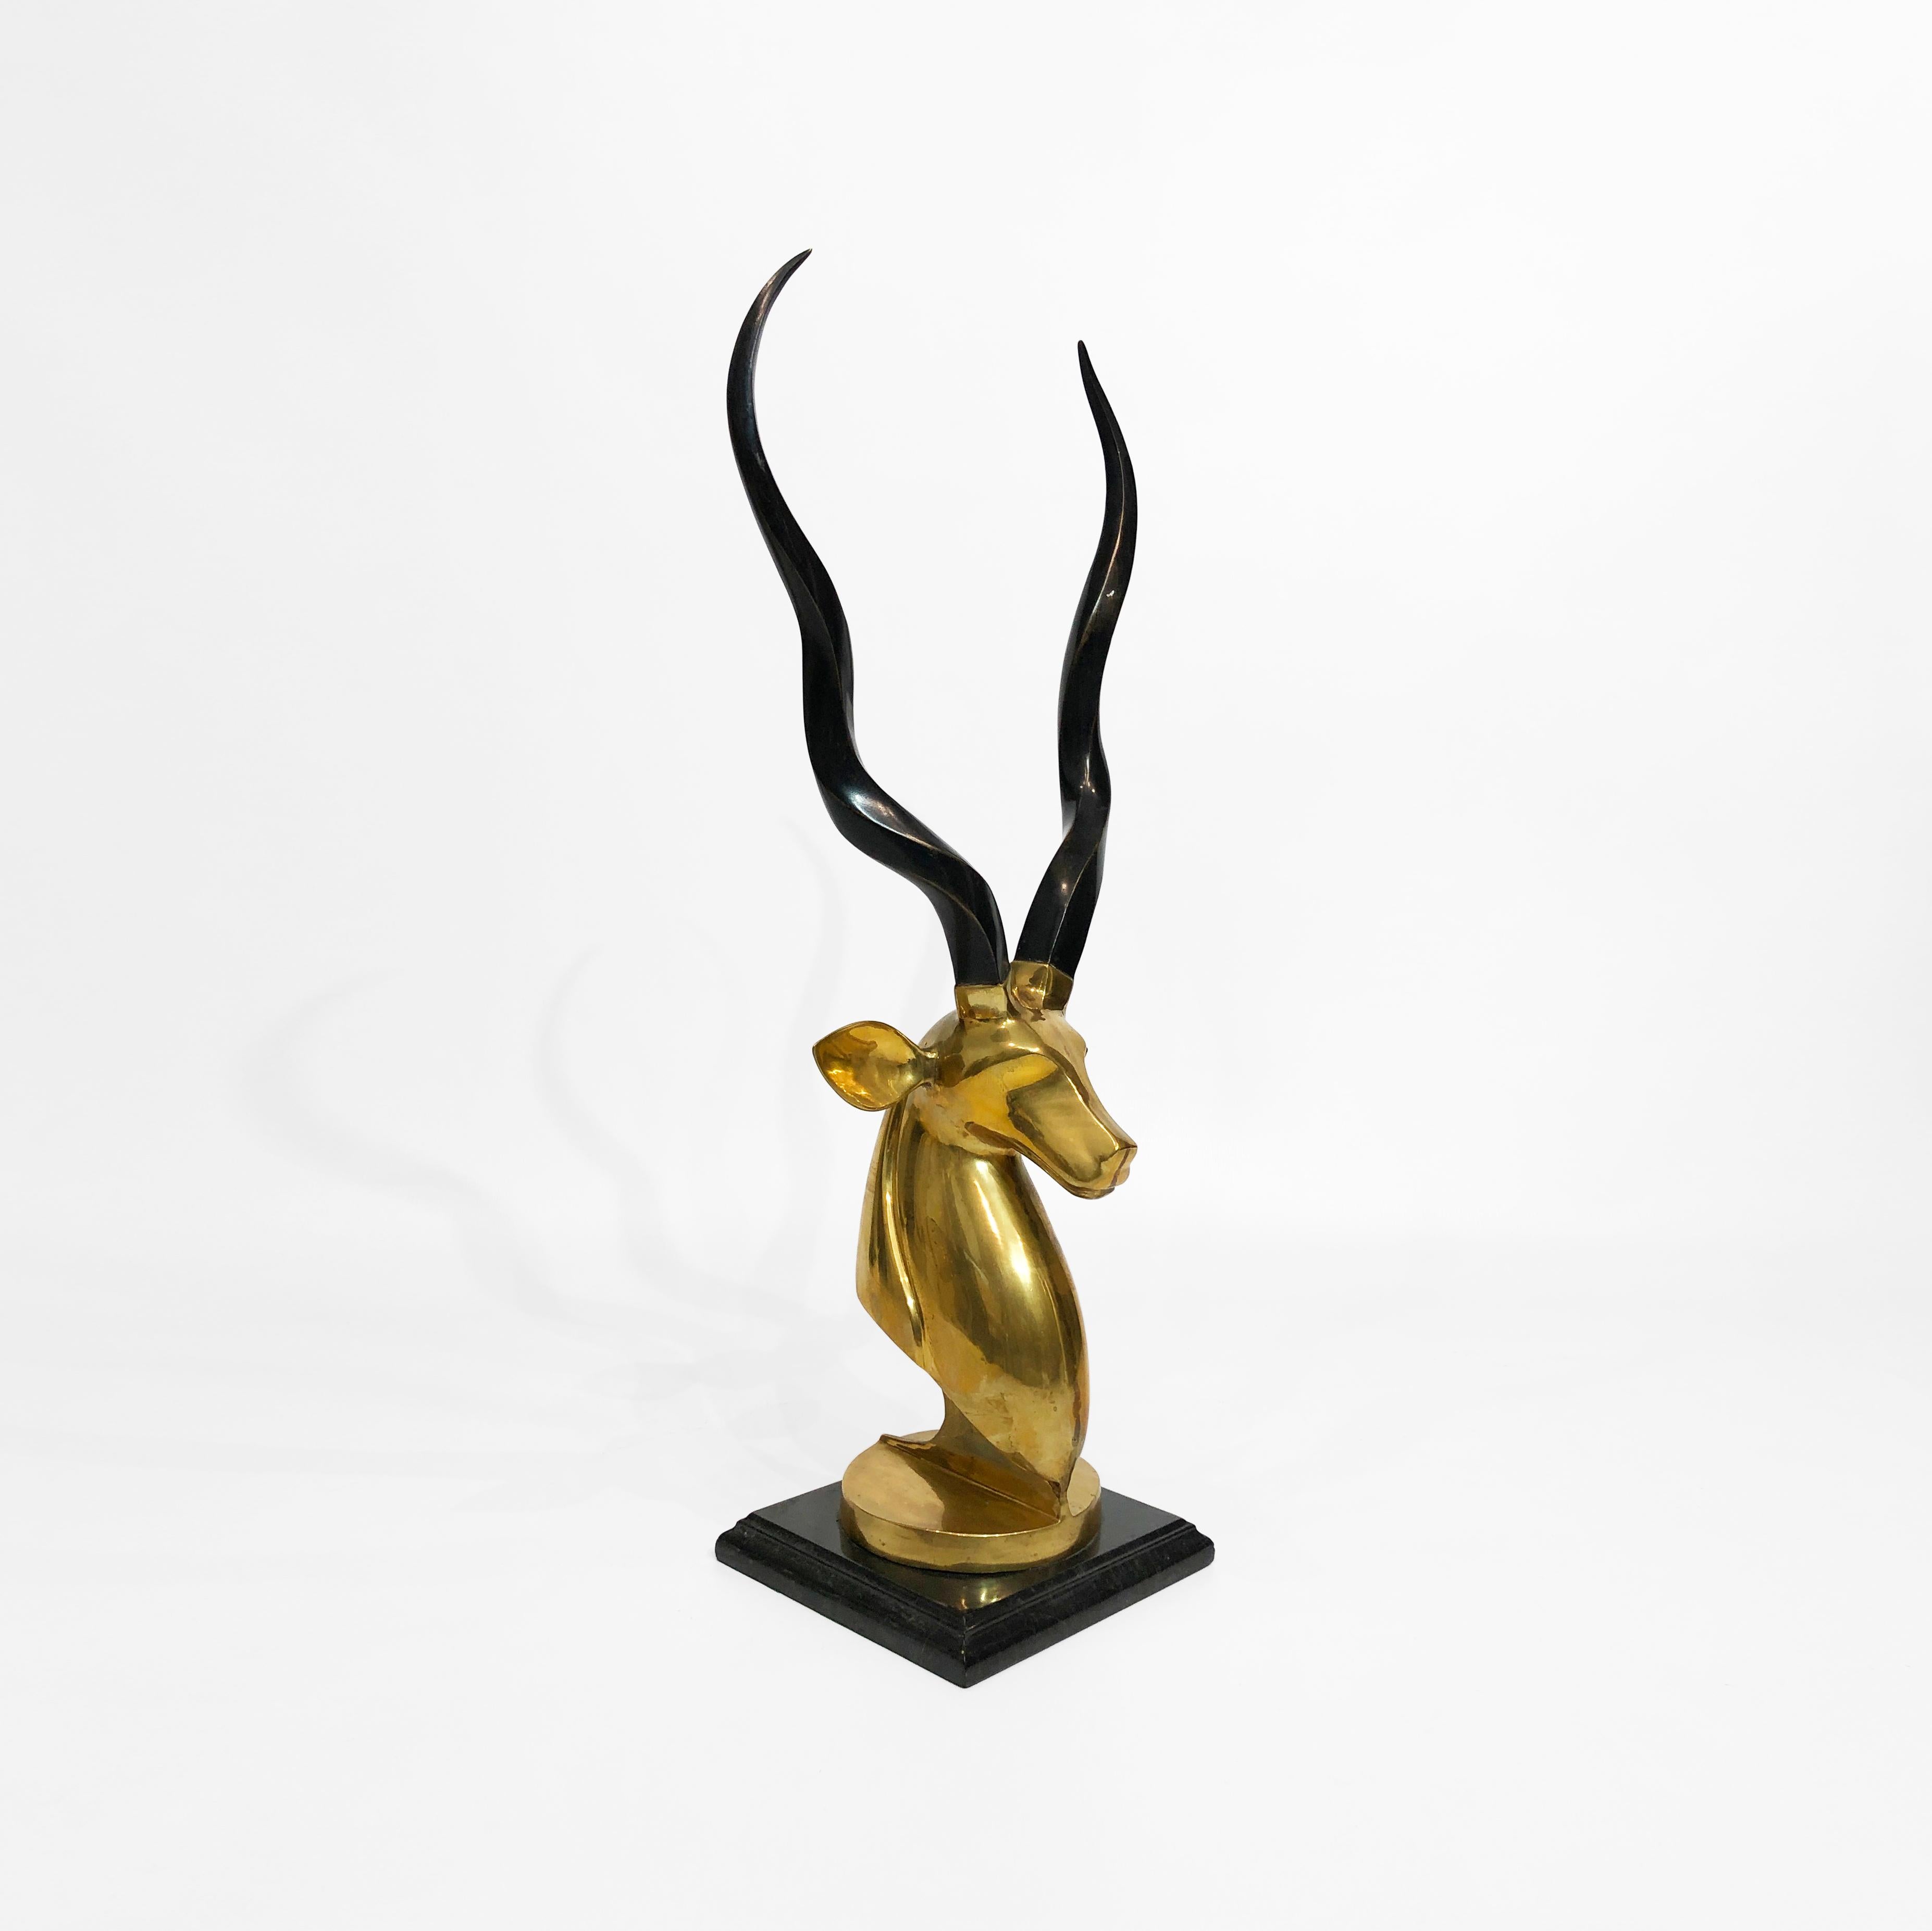 This striking brass antelope/kudu bust is very reminiscent of noted designer Karl Springer's work. An impressive and heavy brass sculpted antelope's head sits on a double ogee black marble base, with soft veins of black and grey. Naturally, the bust